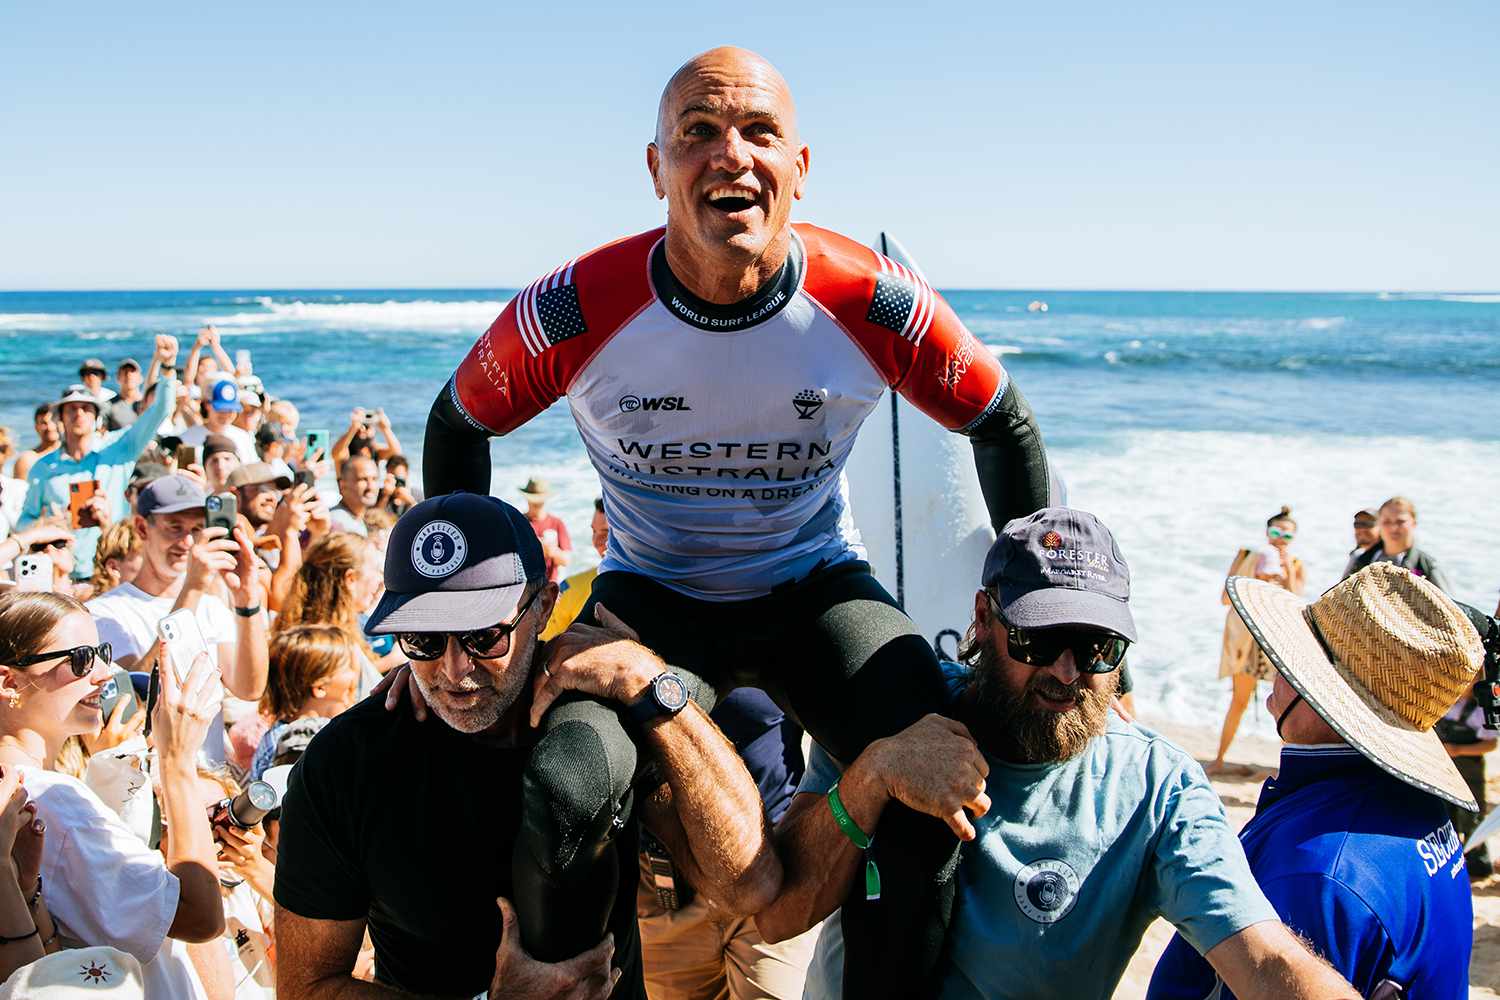 Eleven-time WSL Champion Kelly Slater of the United States after surfing in Heat 5 of the Round of 32 at the Western Australia Margaret River Pro